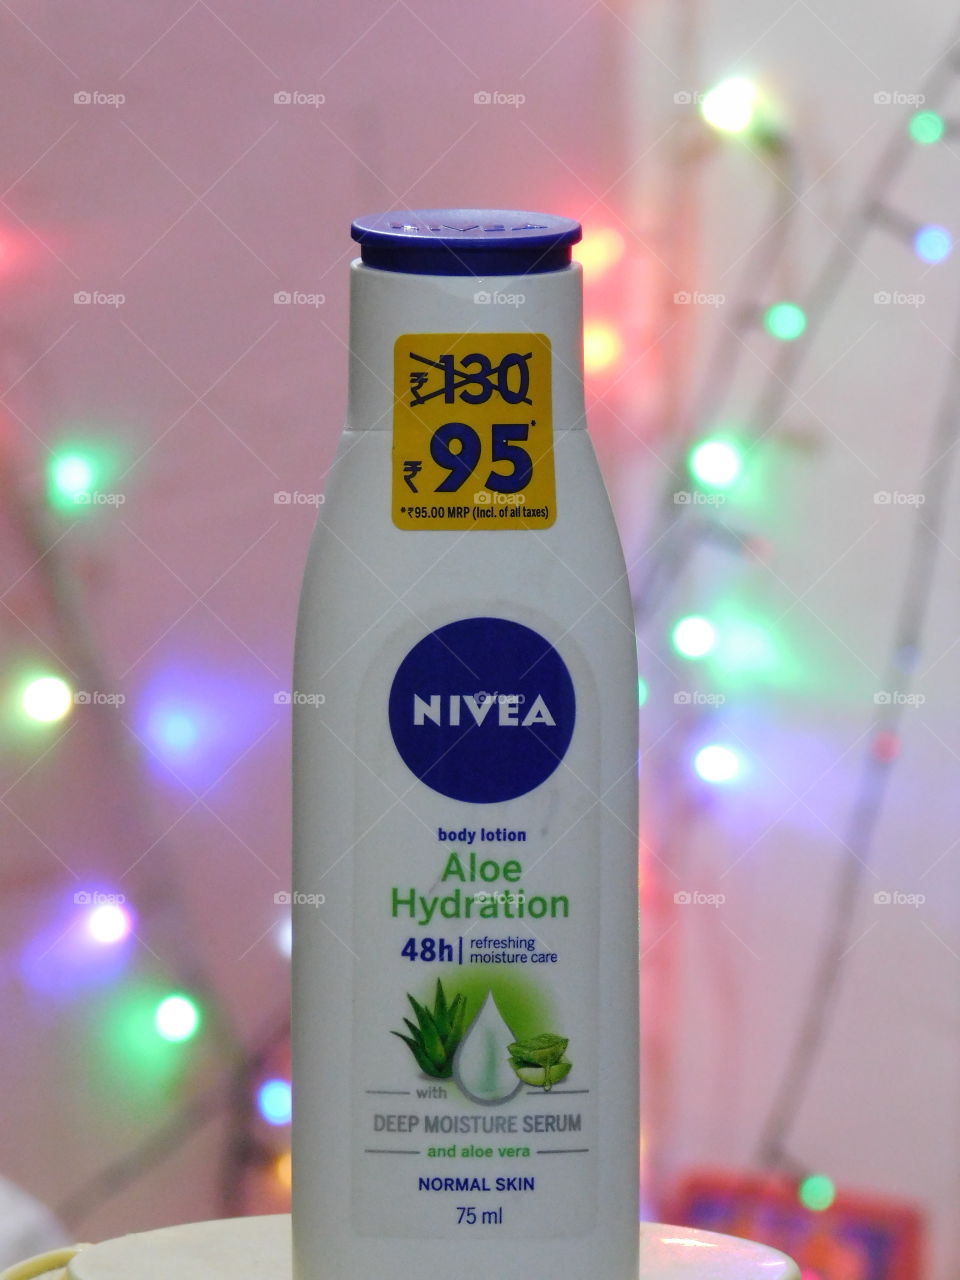 Nivea - NIVEA Aloe Hydration Body Lotion with deep moisture serum and aloe Vera for normal skin. It give your skin fast absorbing and refreshing moisturization and make it noticably smoother for 48 hours.